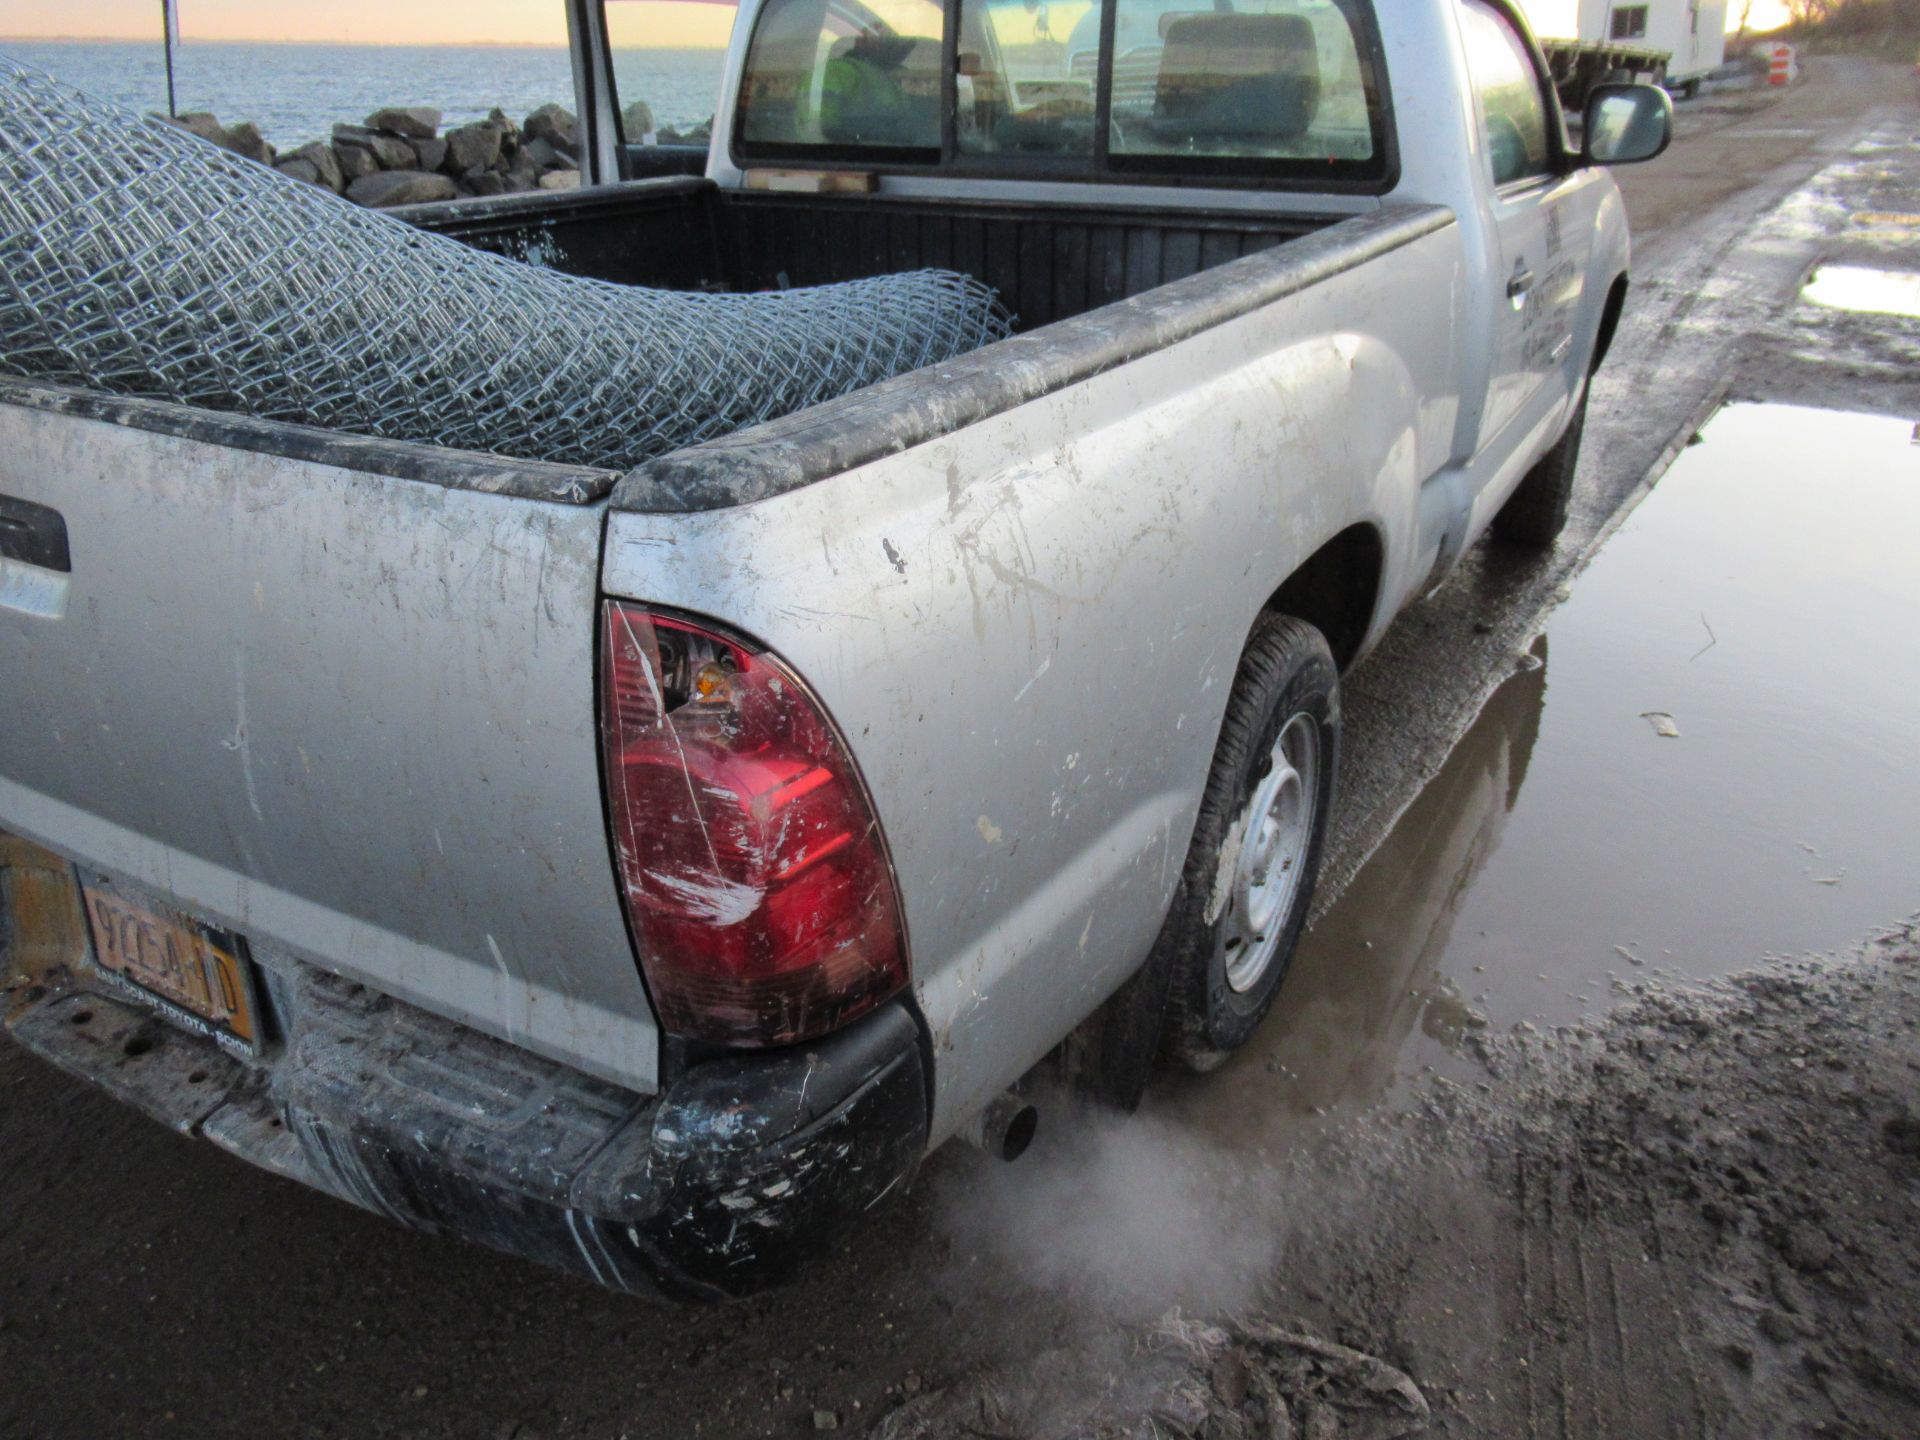 2008 TOYOTA TACOMA PICKUP TRUCK, AUTOMATIC, WITH APPROXIMATELY 105,732 MILES, VIN: 5TENX22N382504186 - Image 9 of 12